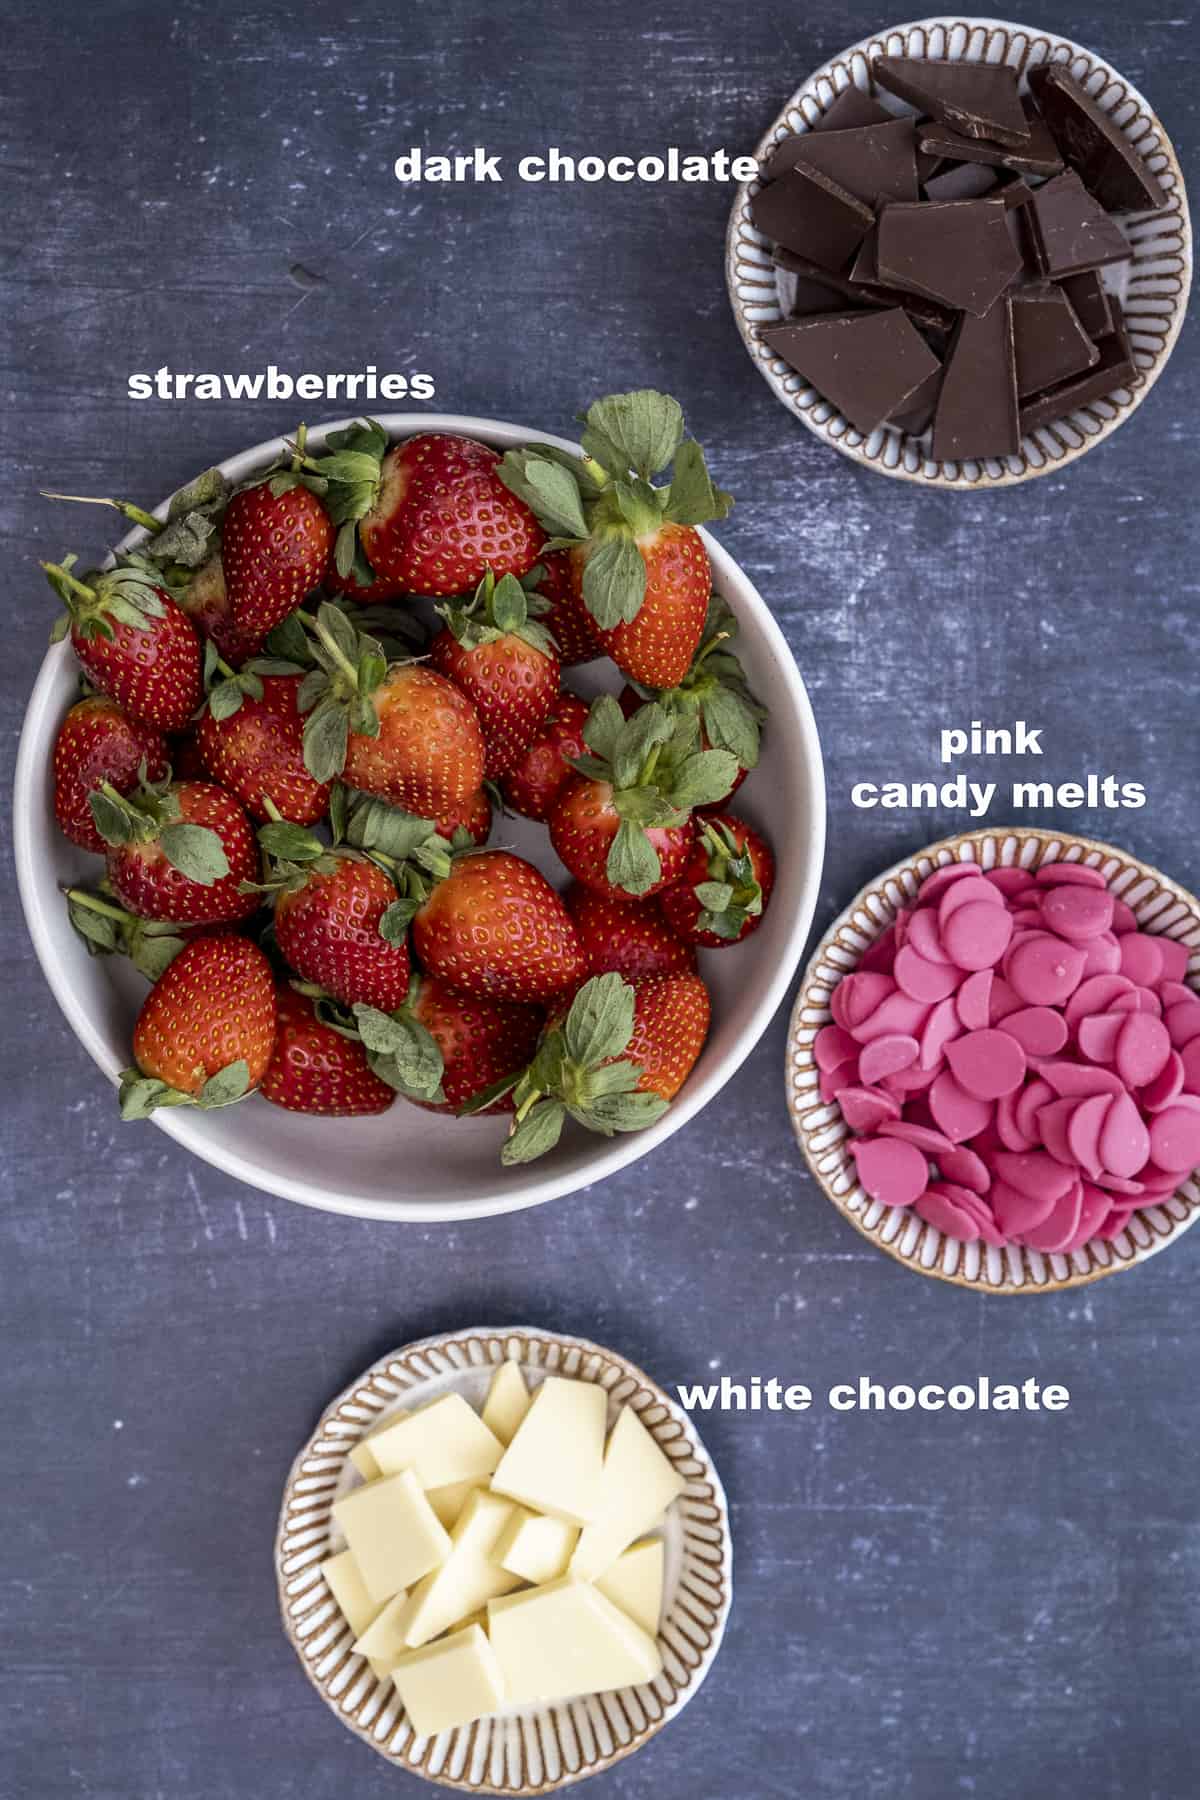 Strawberries, chopped dark chocolate, pink candy melts and chopped white chocolate in separate bowls on a dark background.